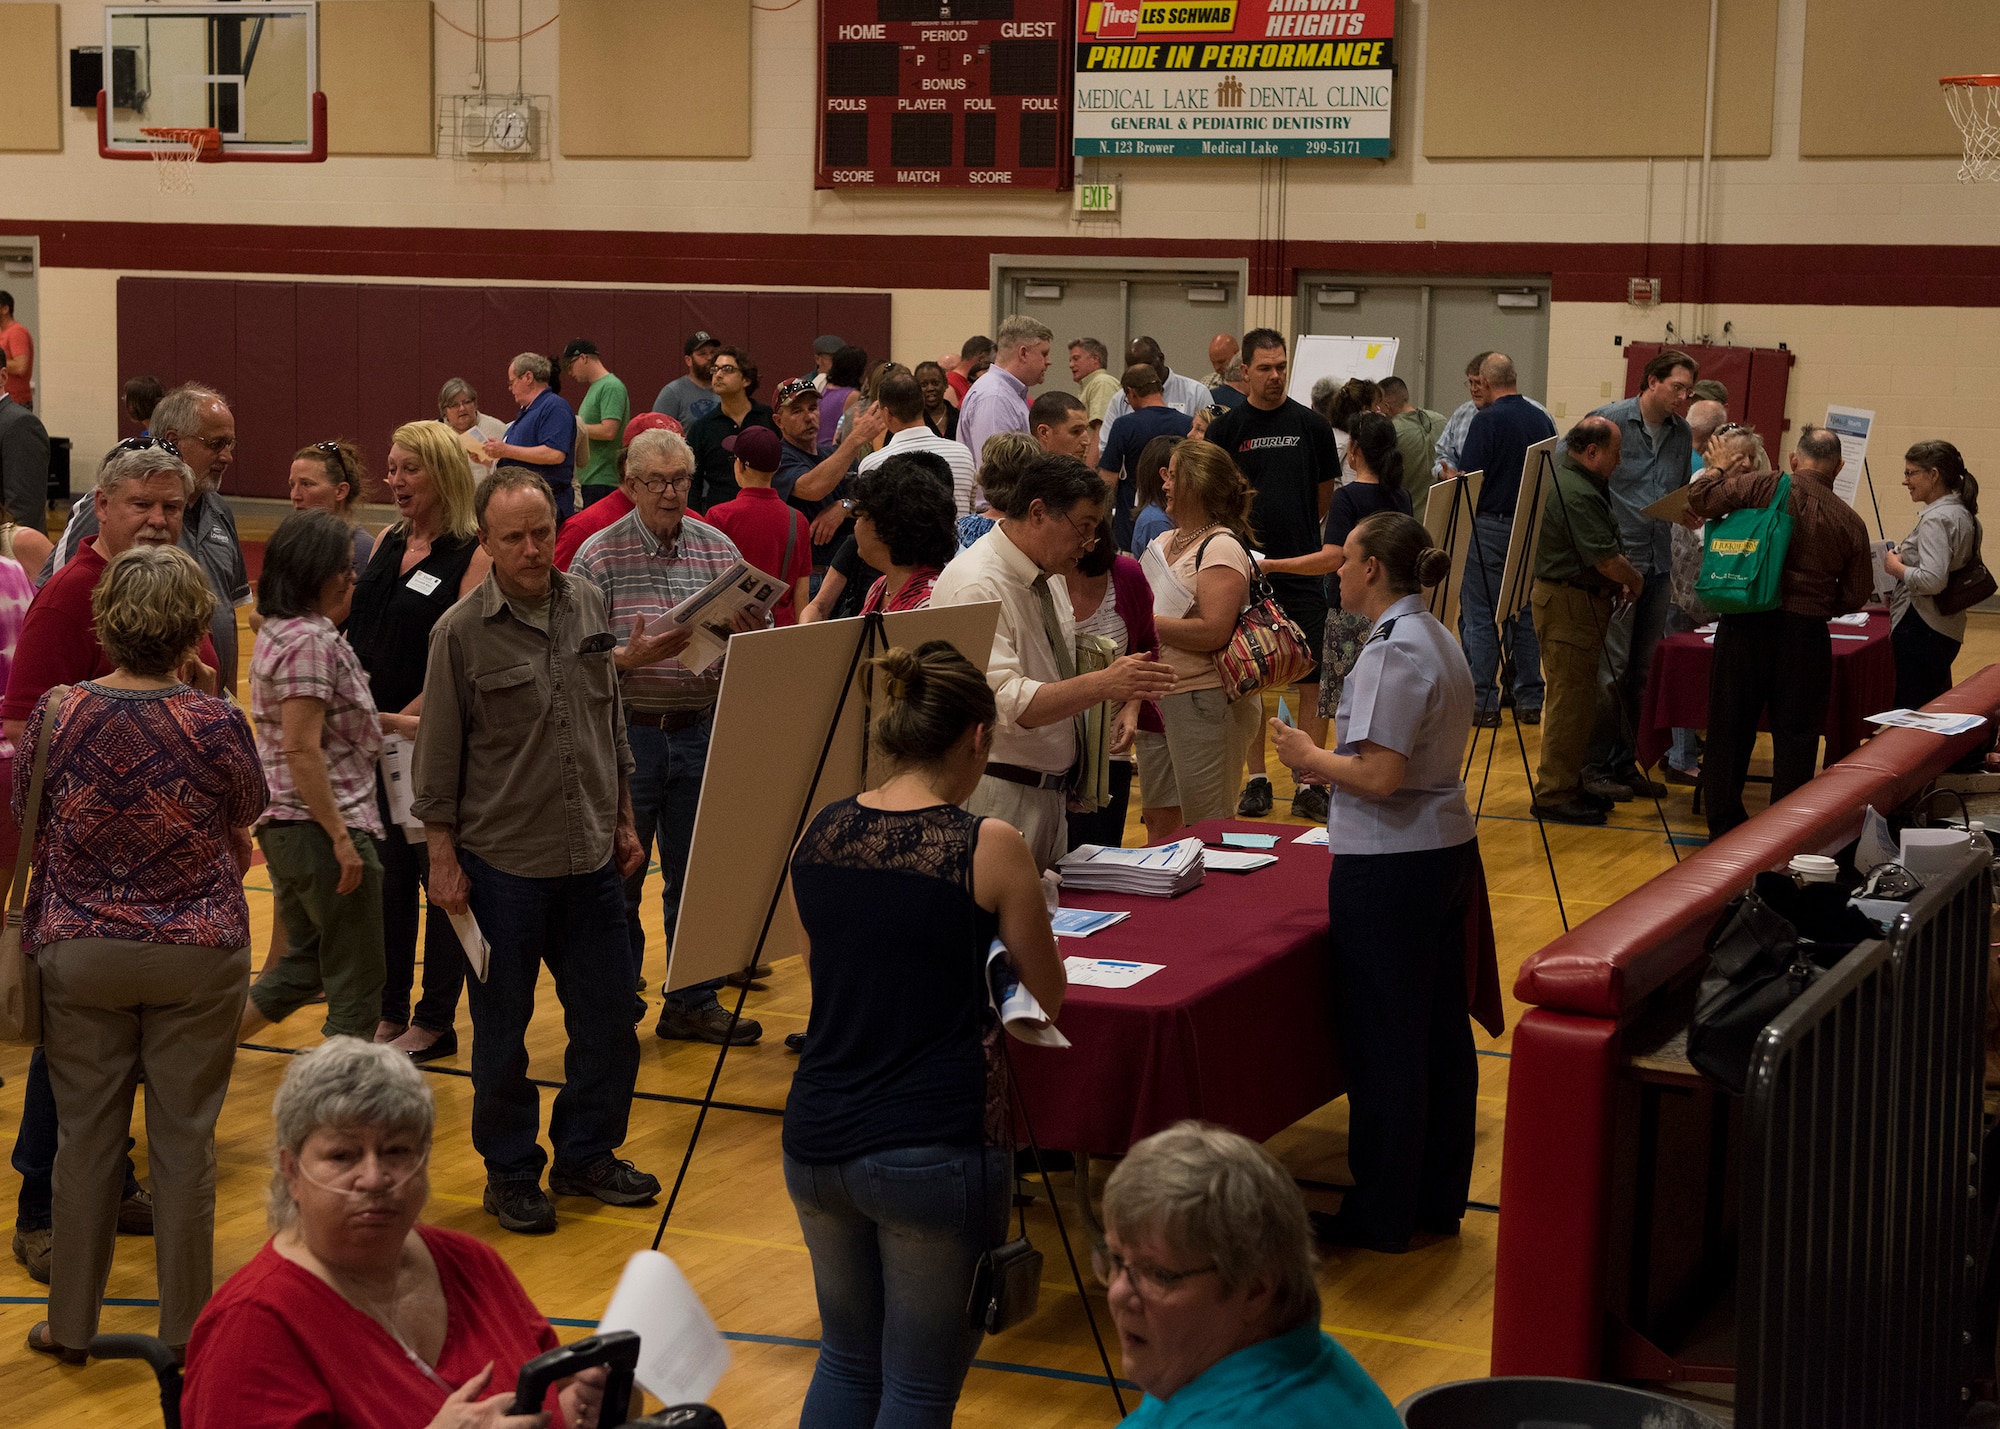 Local residents seek additional information about groundwater contamination at booths manned by local health, science and administrative authorities at Medical Lake High School, Medical Lake, Wash. May 23, 2017. Fairchild Air Force Base leadership and environmental specialists, in an act of transparency to the local community, arranged a public meeting and information-sharing session to help inform residents.
(U.S. Air Force photo / Airman 1st Class Ryan Lackey)